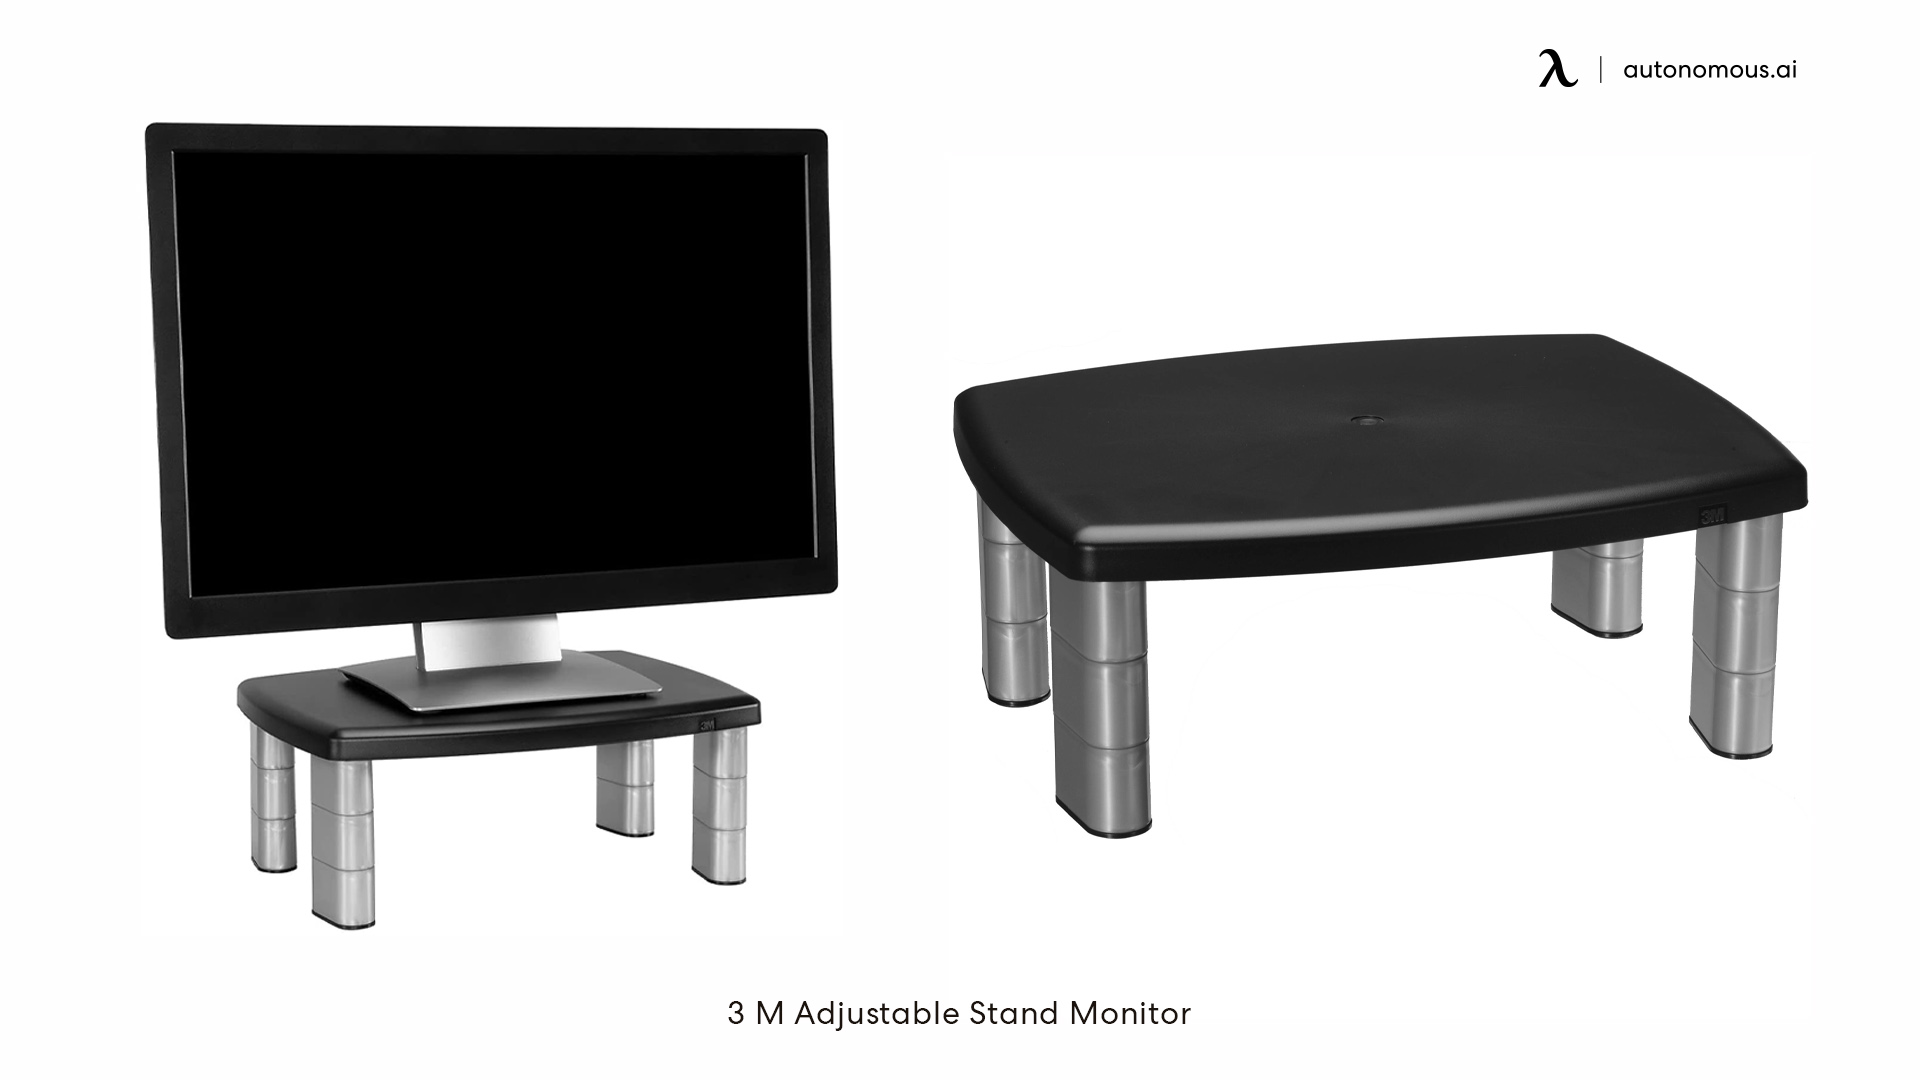 3 M Adjustable Stand Monitor